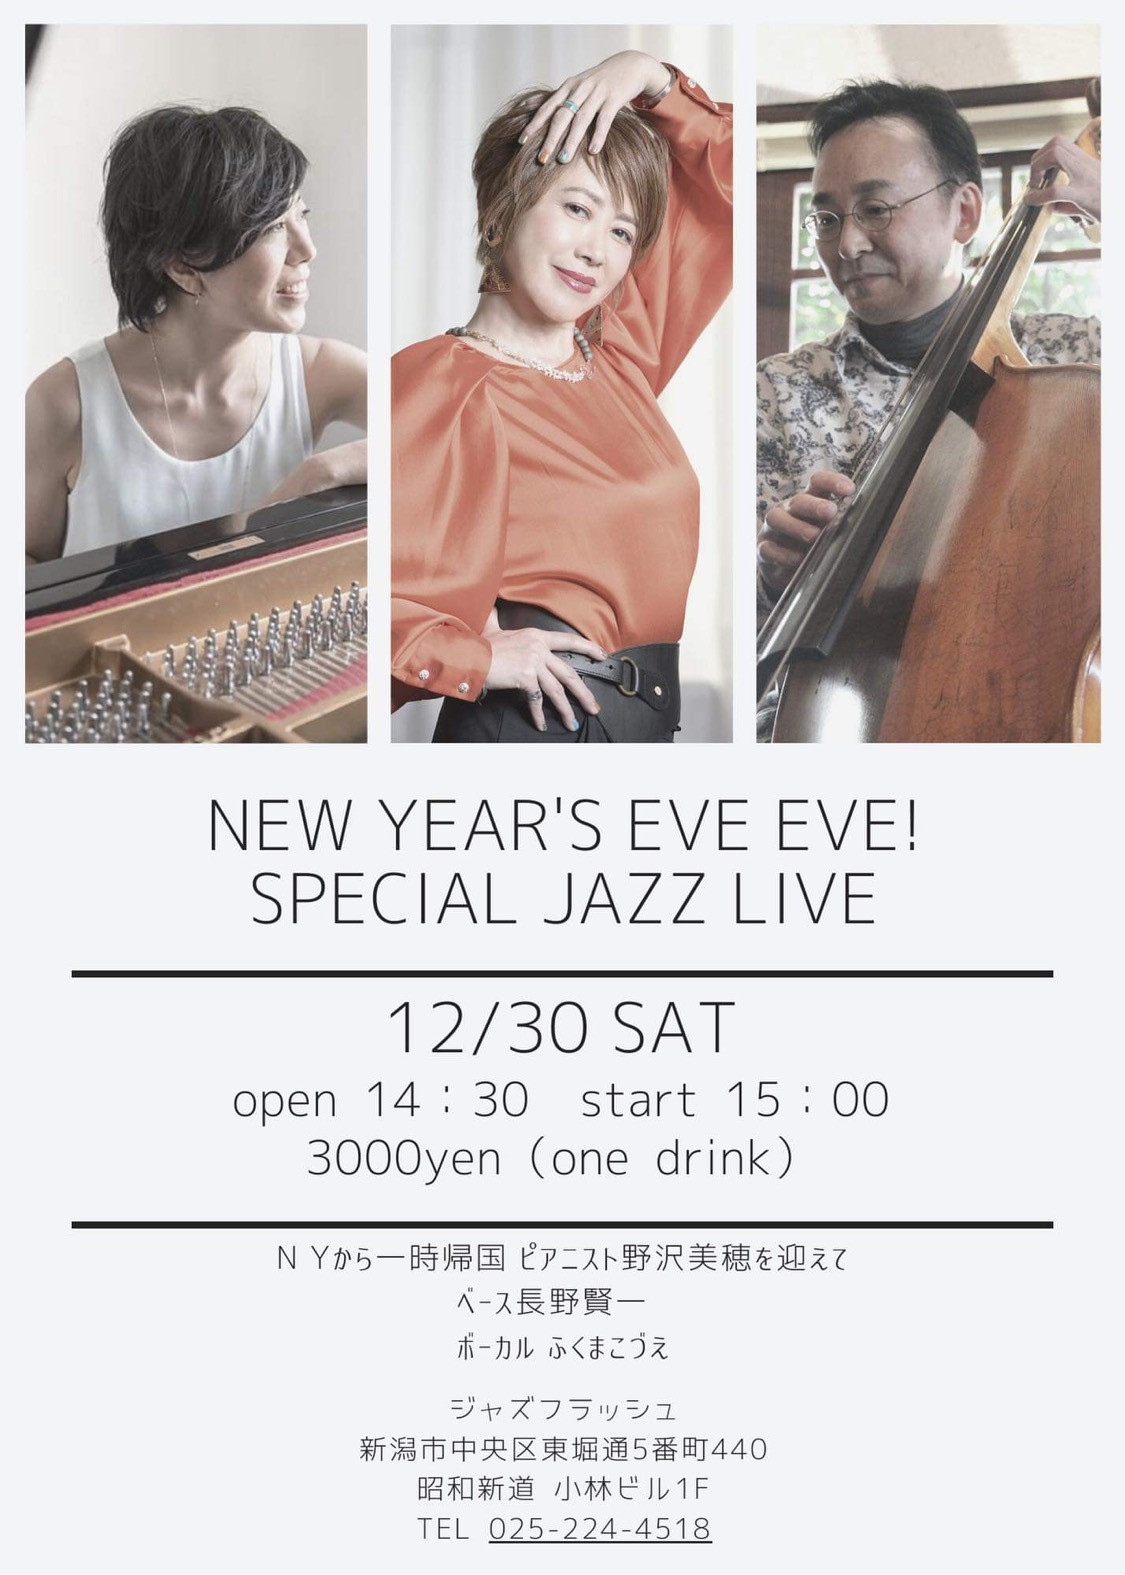 New Year's Eve Eve! Special Jazz Live - Jazz FLASH